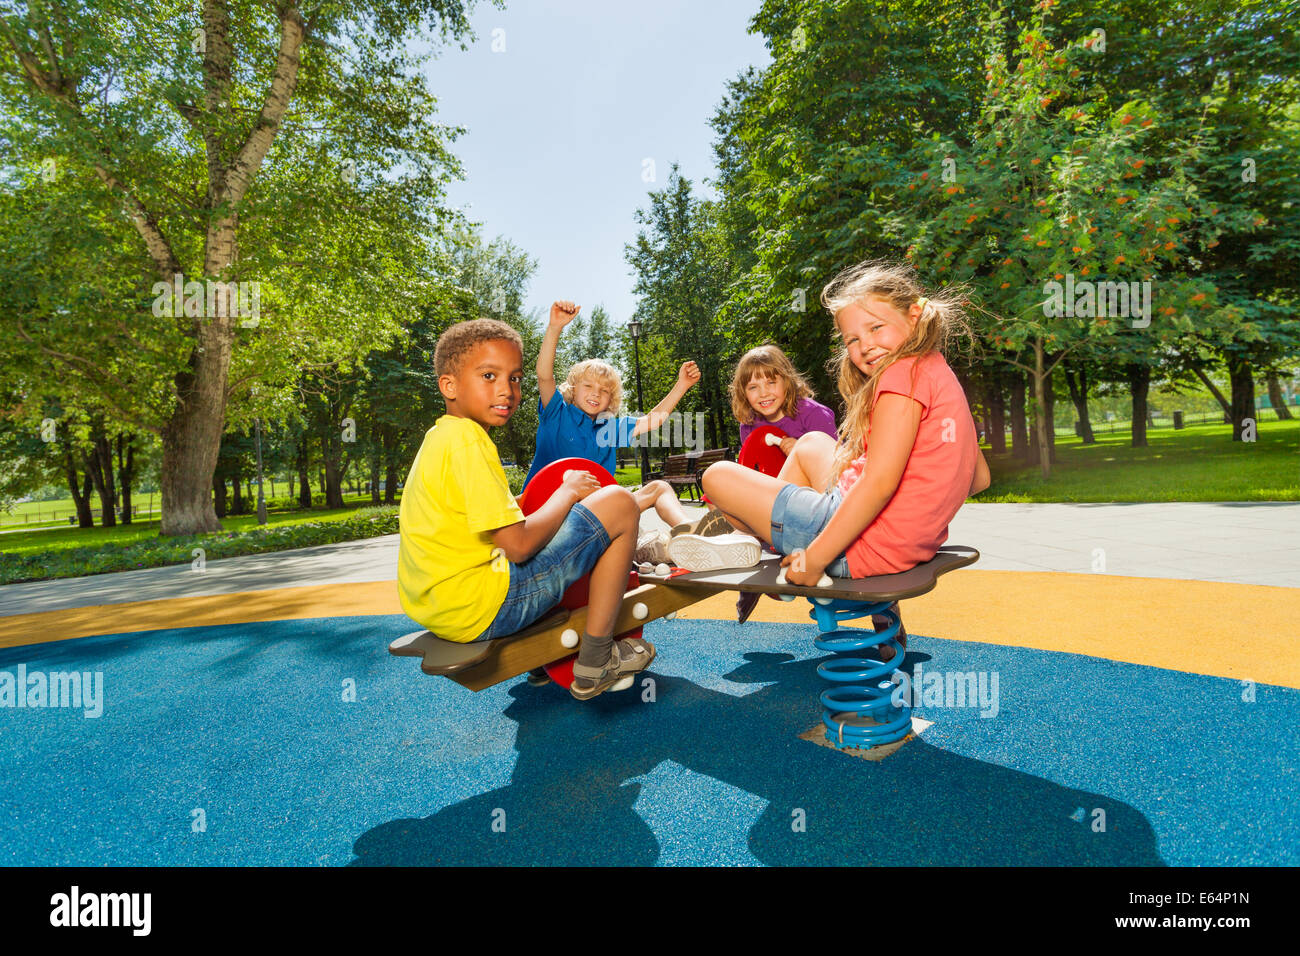 Children sitting on playground carousel together Stock Photo